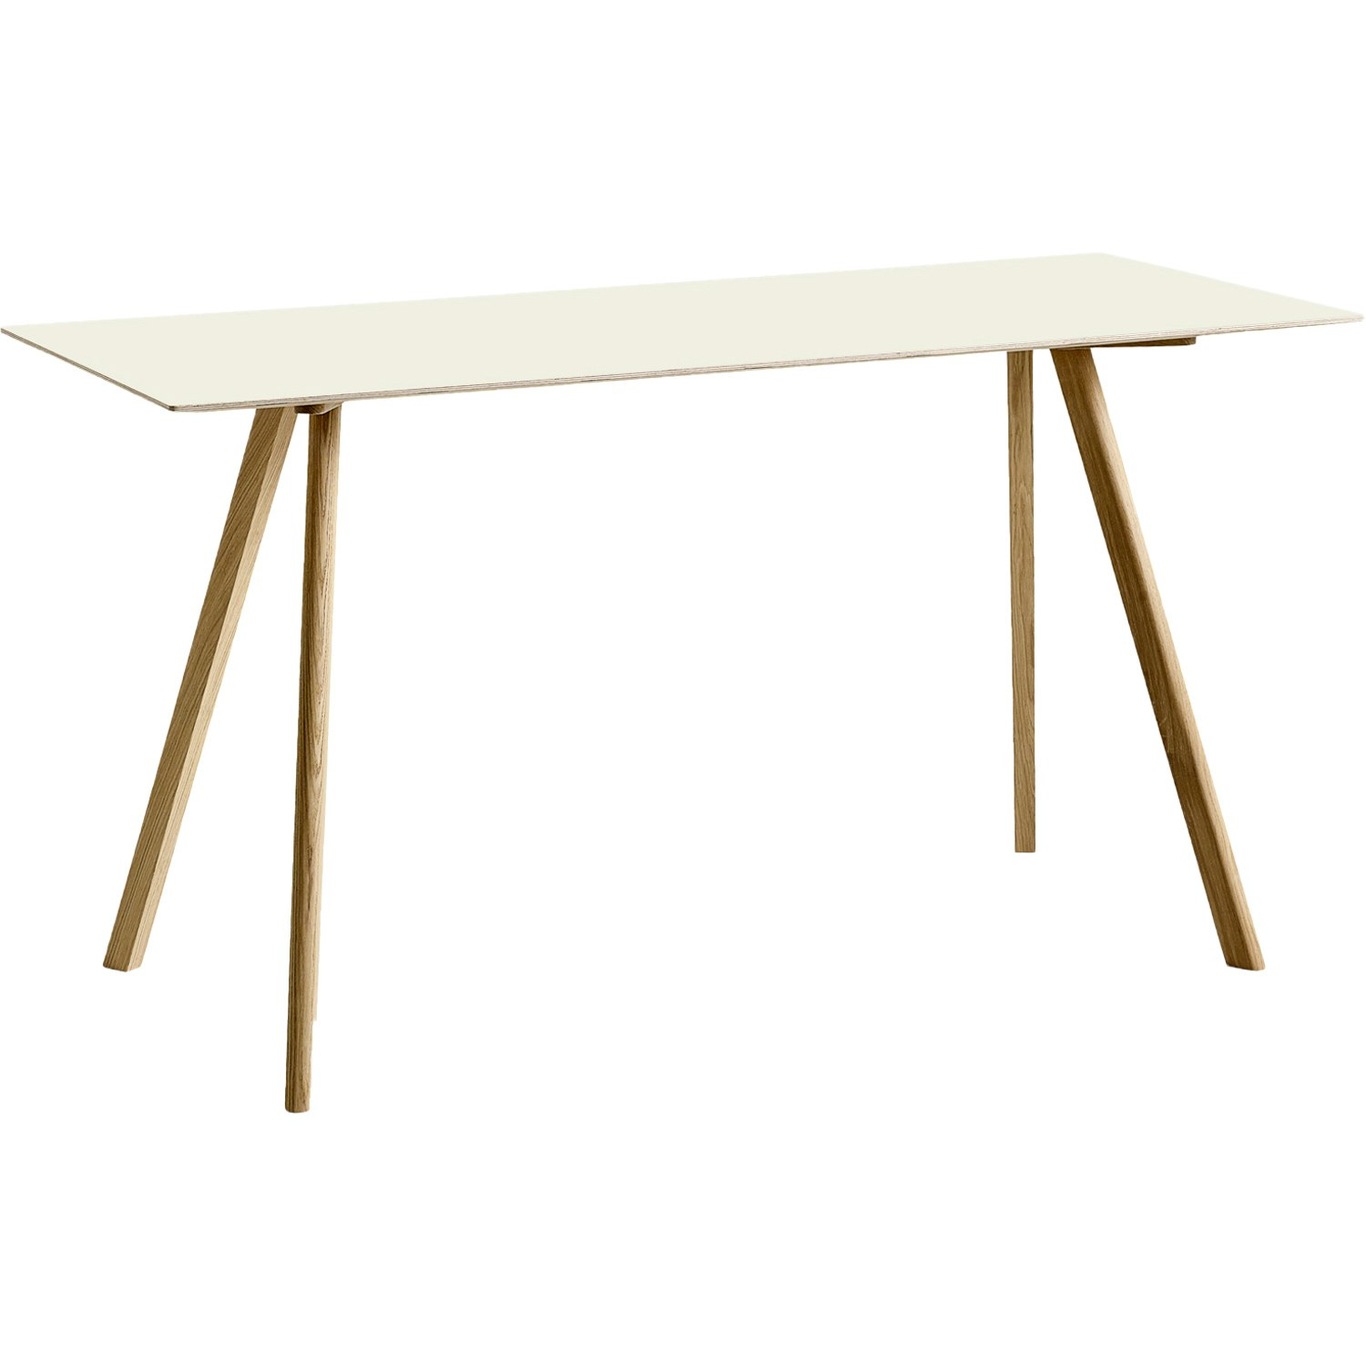 CPH 30 Bar Table 80x200x105 cm, Waterbased Lacquered Oak/Off-White Linoleum